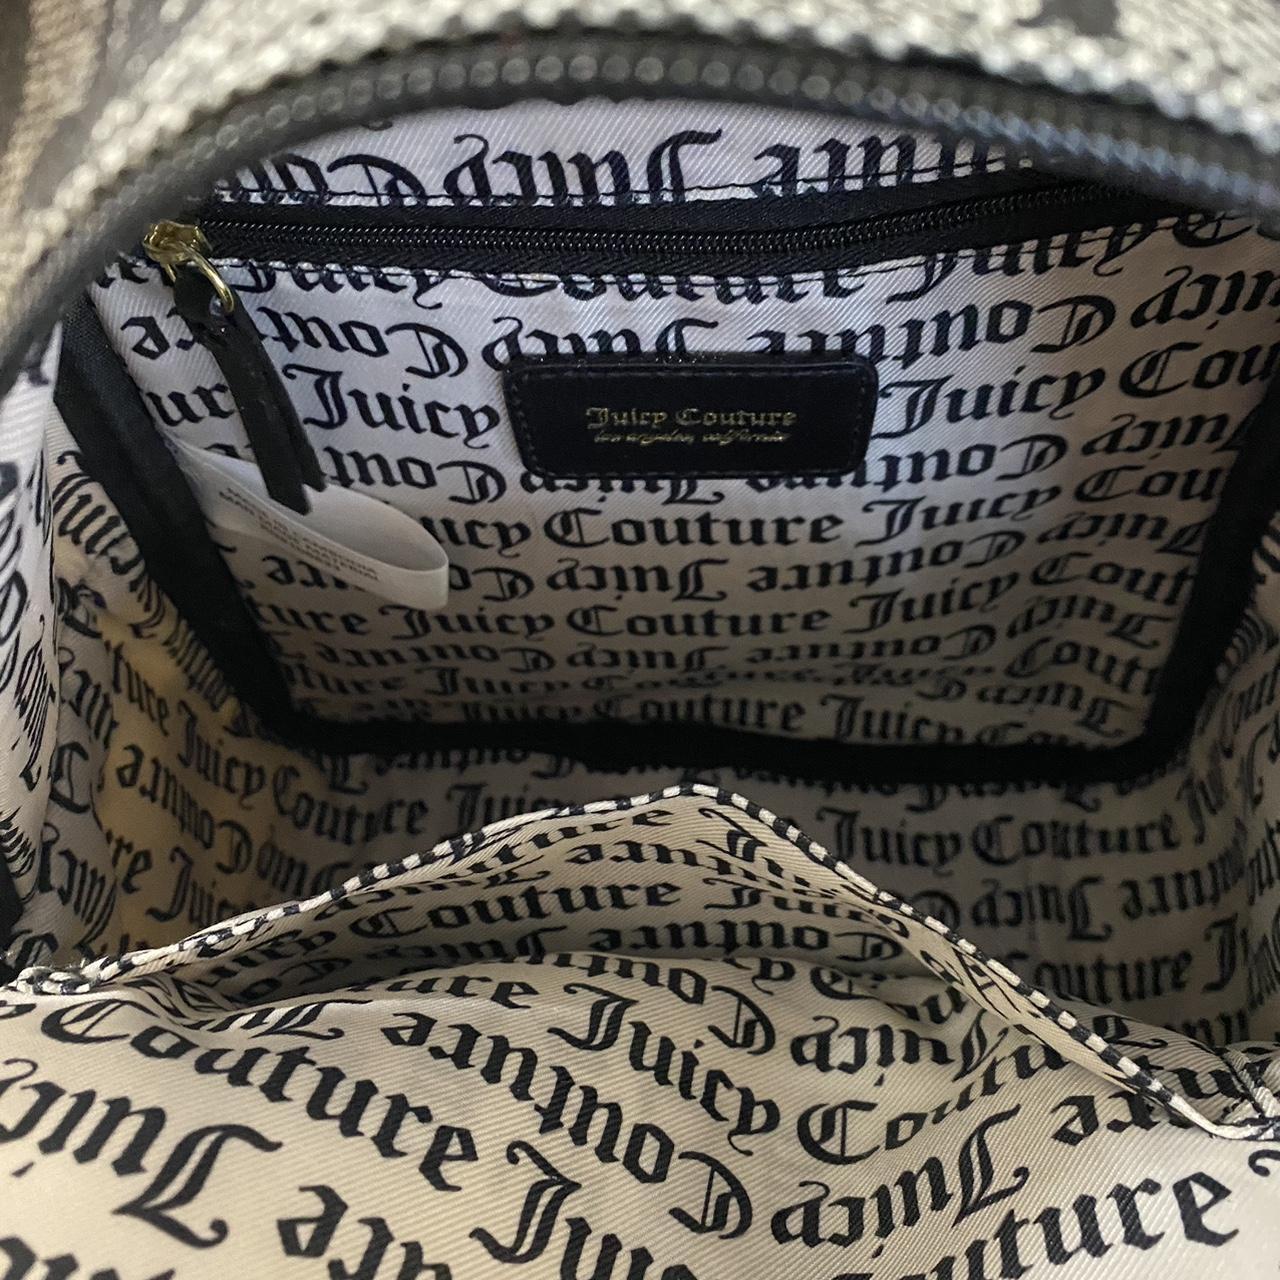 Juicy Couture Backpack Never been used, in new - Depop